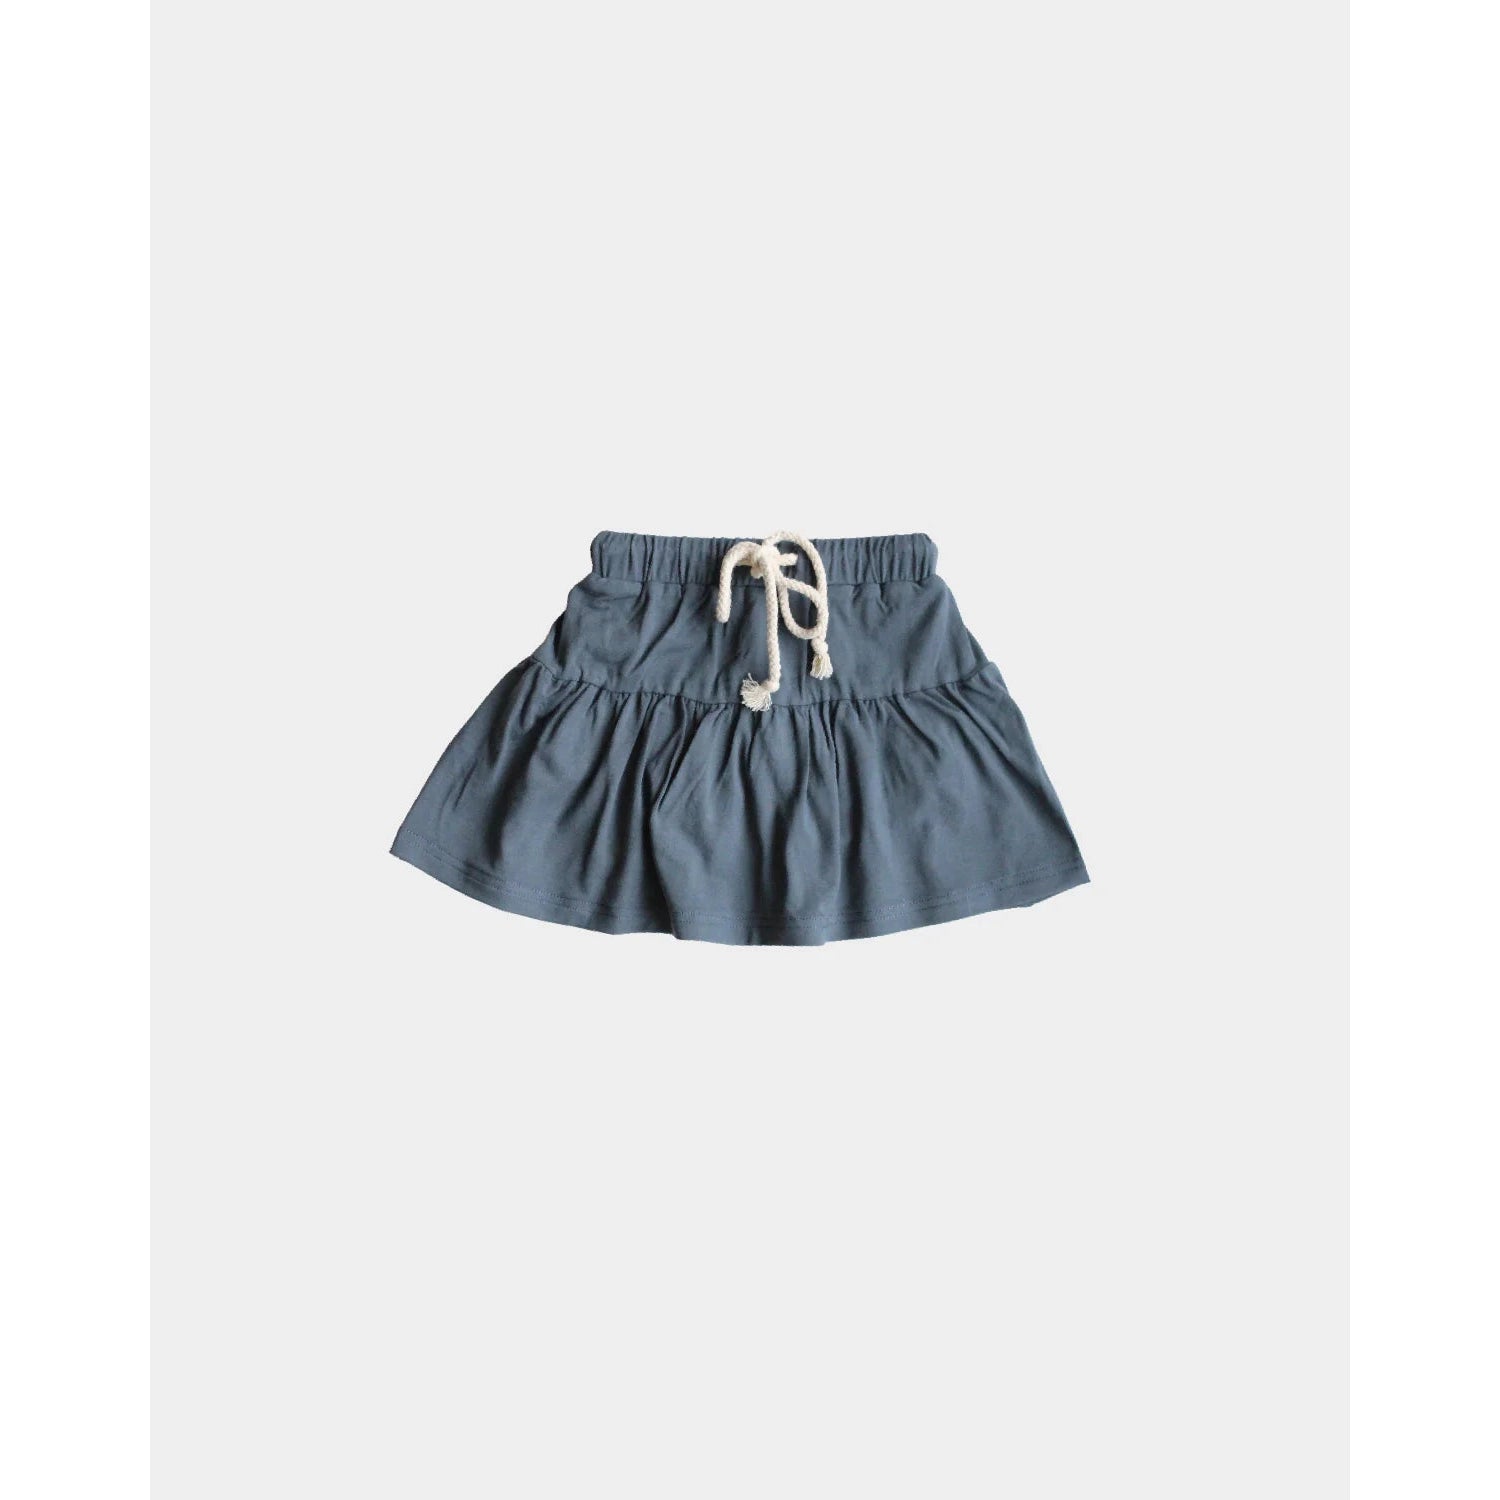 Baby Sprouts Dusty Blue Skort-Baby Sprouts-Little Giant Kidz